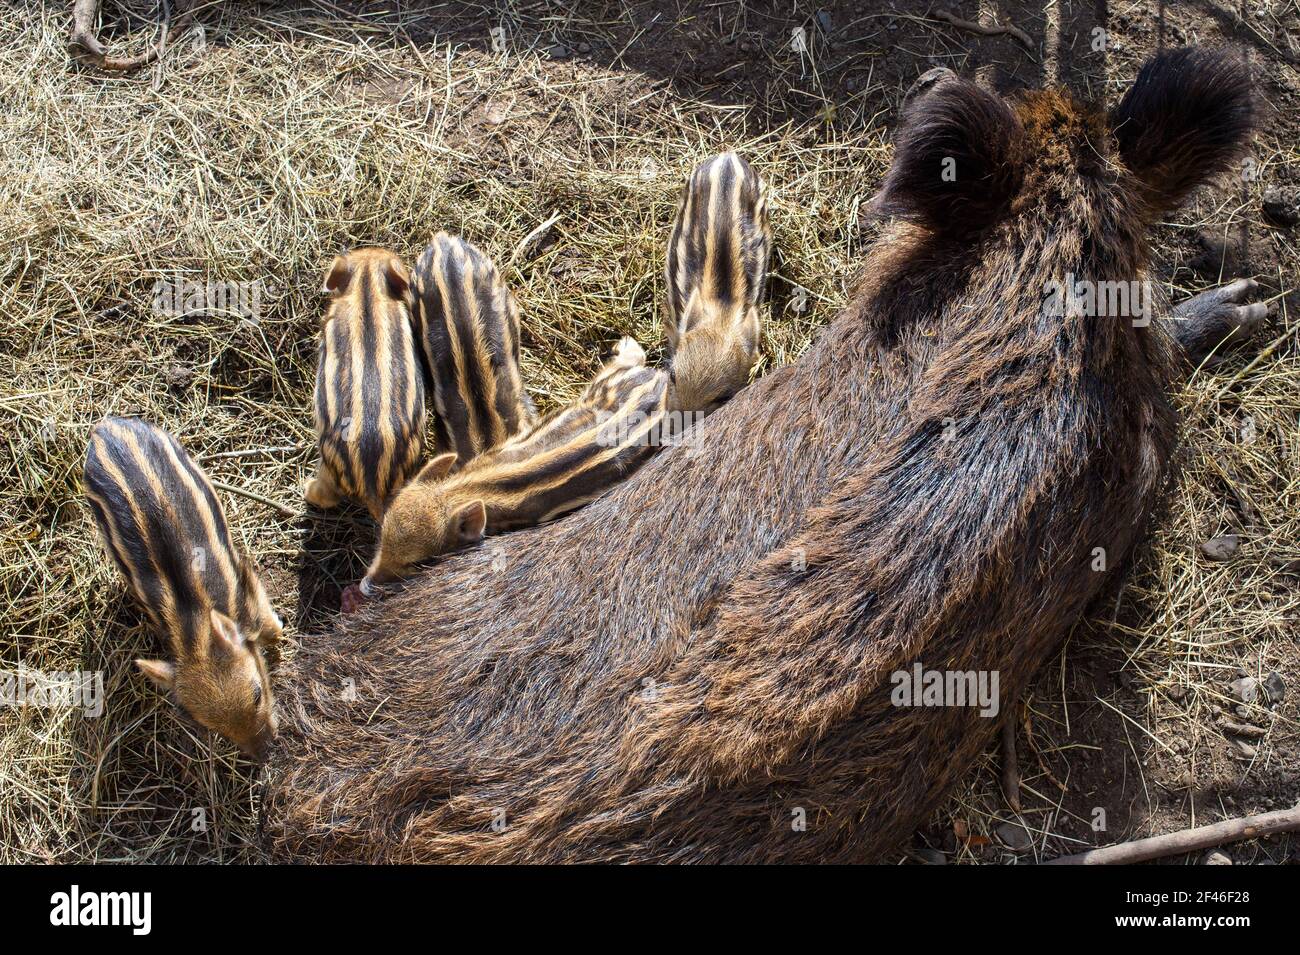 Halberstadt, Germany. 19th Mar, 2021. A doe suckles the wild boar offspring in Halberstadt Zoo. The young pigs are only a few days old and can be easily observed in their outdoor enclosure. A total of seven animals were born in the zoo. The frenzy season, i.e. the mating season, is mainly in the winter months, so that with the spring, the freshet season begins. Credit: Klaus-Dietmar Gabbert/dpa-Zentralbild/ZB/dpa/Alamy Live News Stock Photo